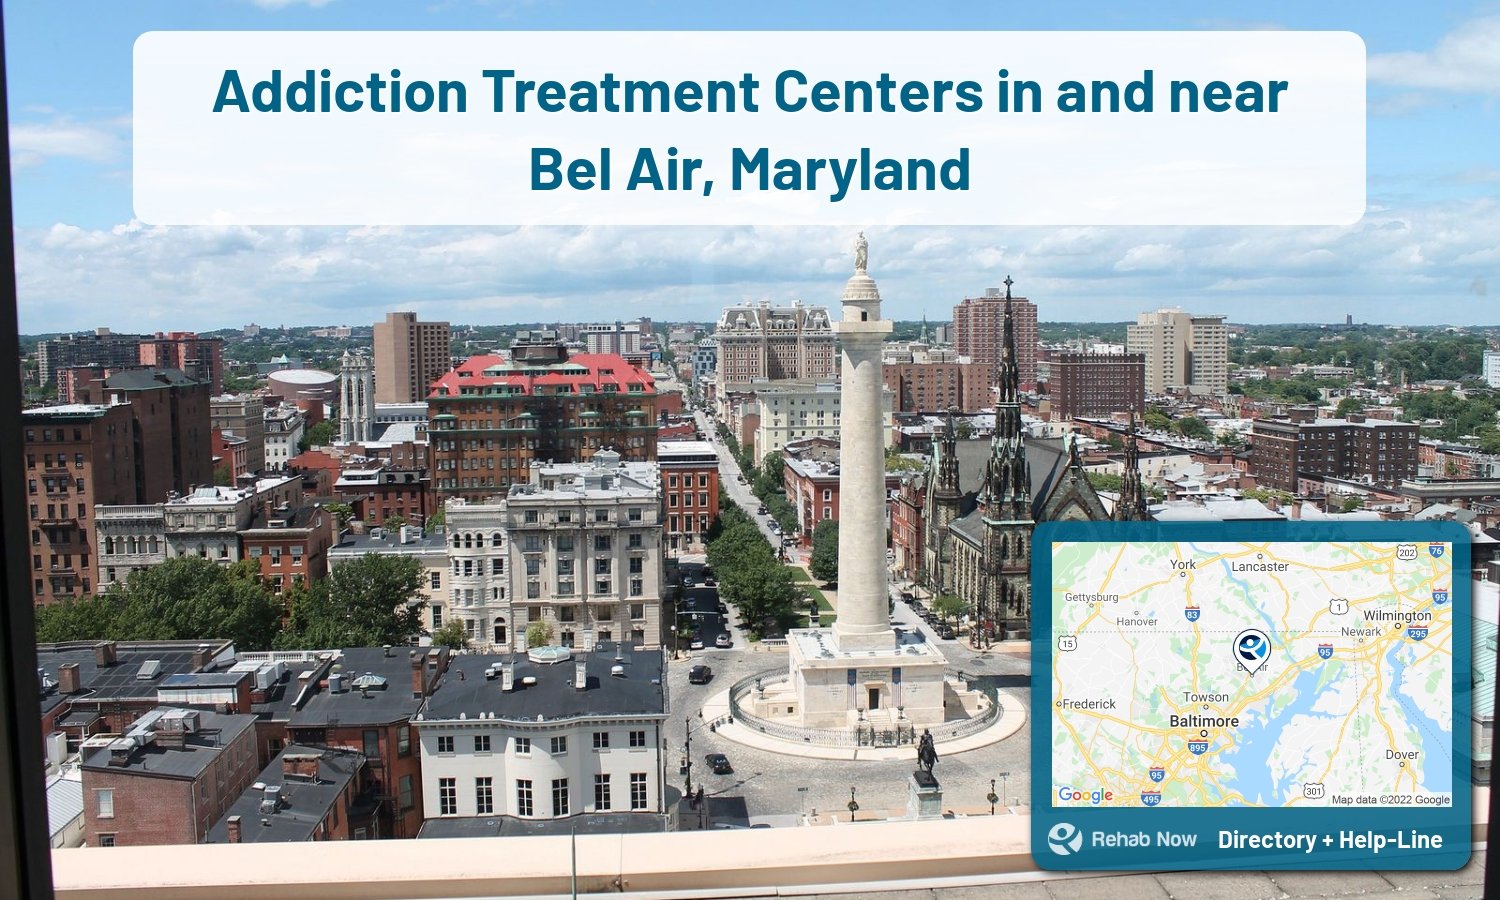 Bel Air, MD Treatment Centers. Find drug rehab in Bel Air, Maryland, or detox and treatment programs. Get the right help now!